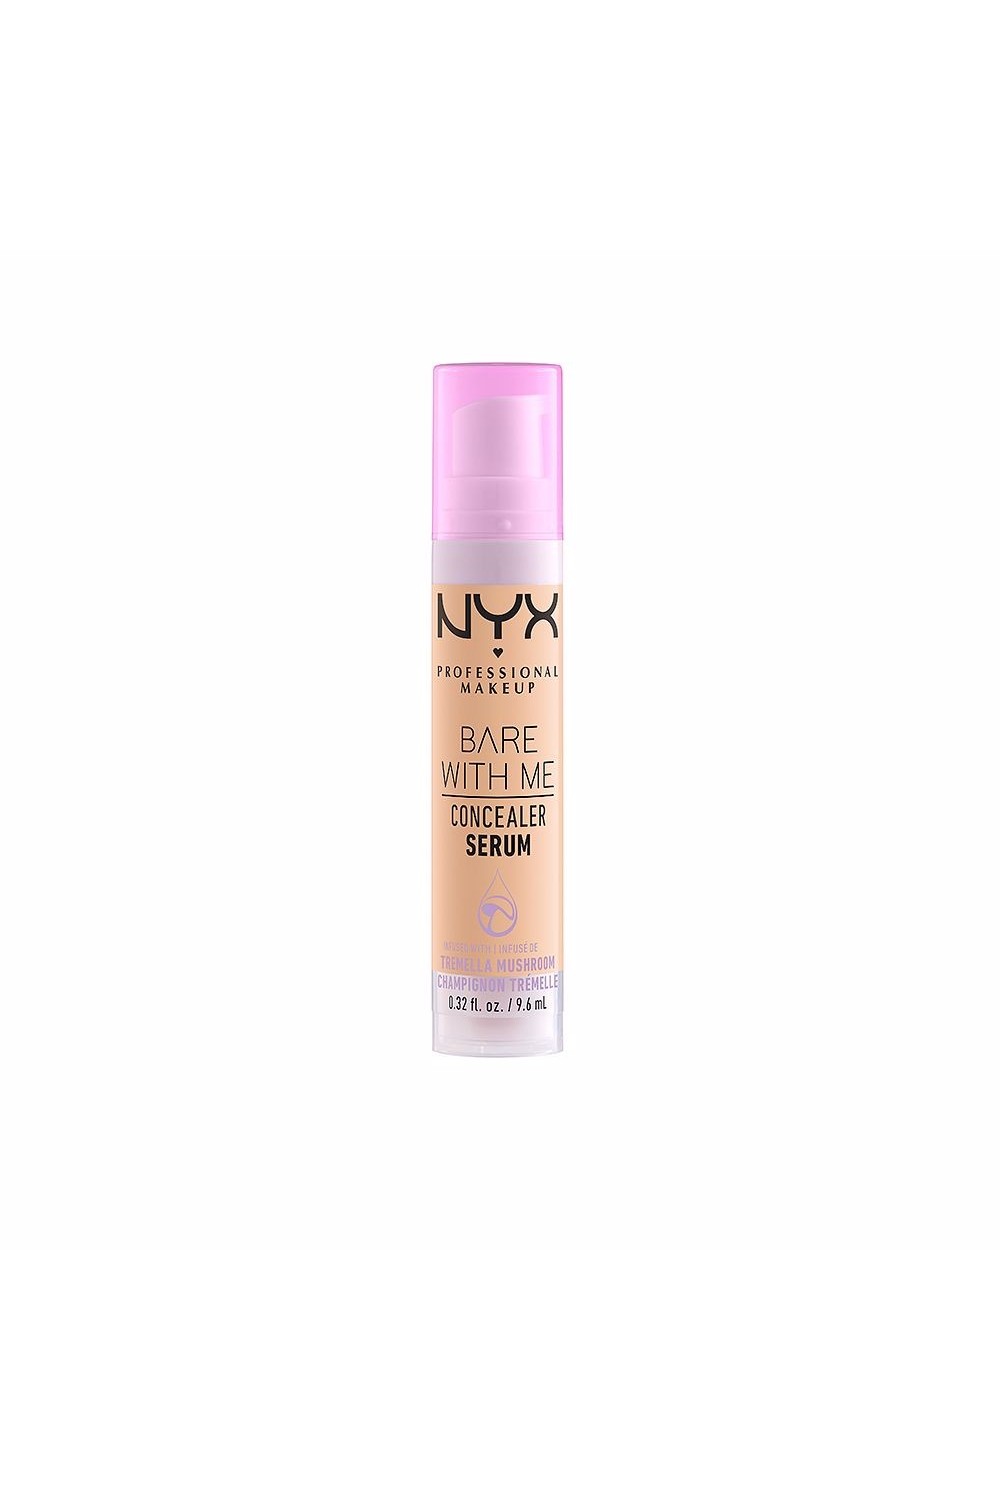 Nyx Bare With Me Concealer Serum 04-Beige